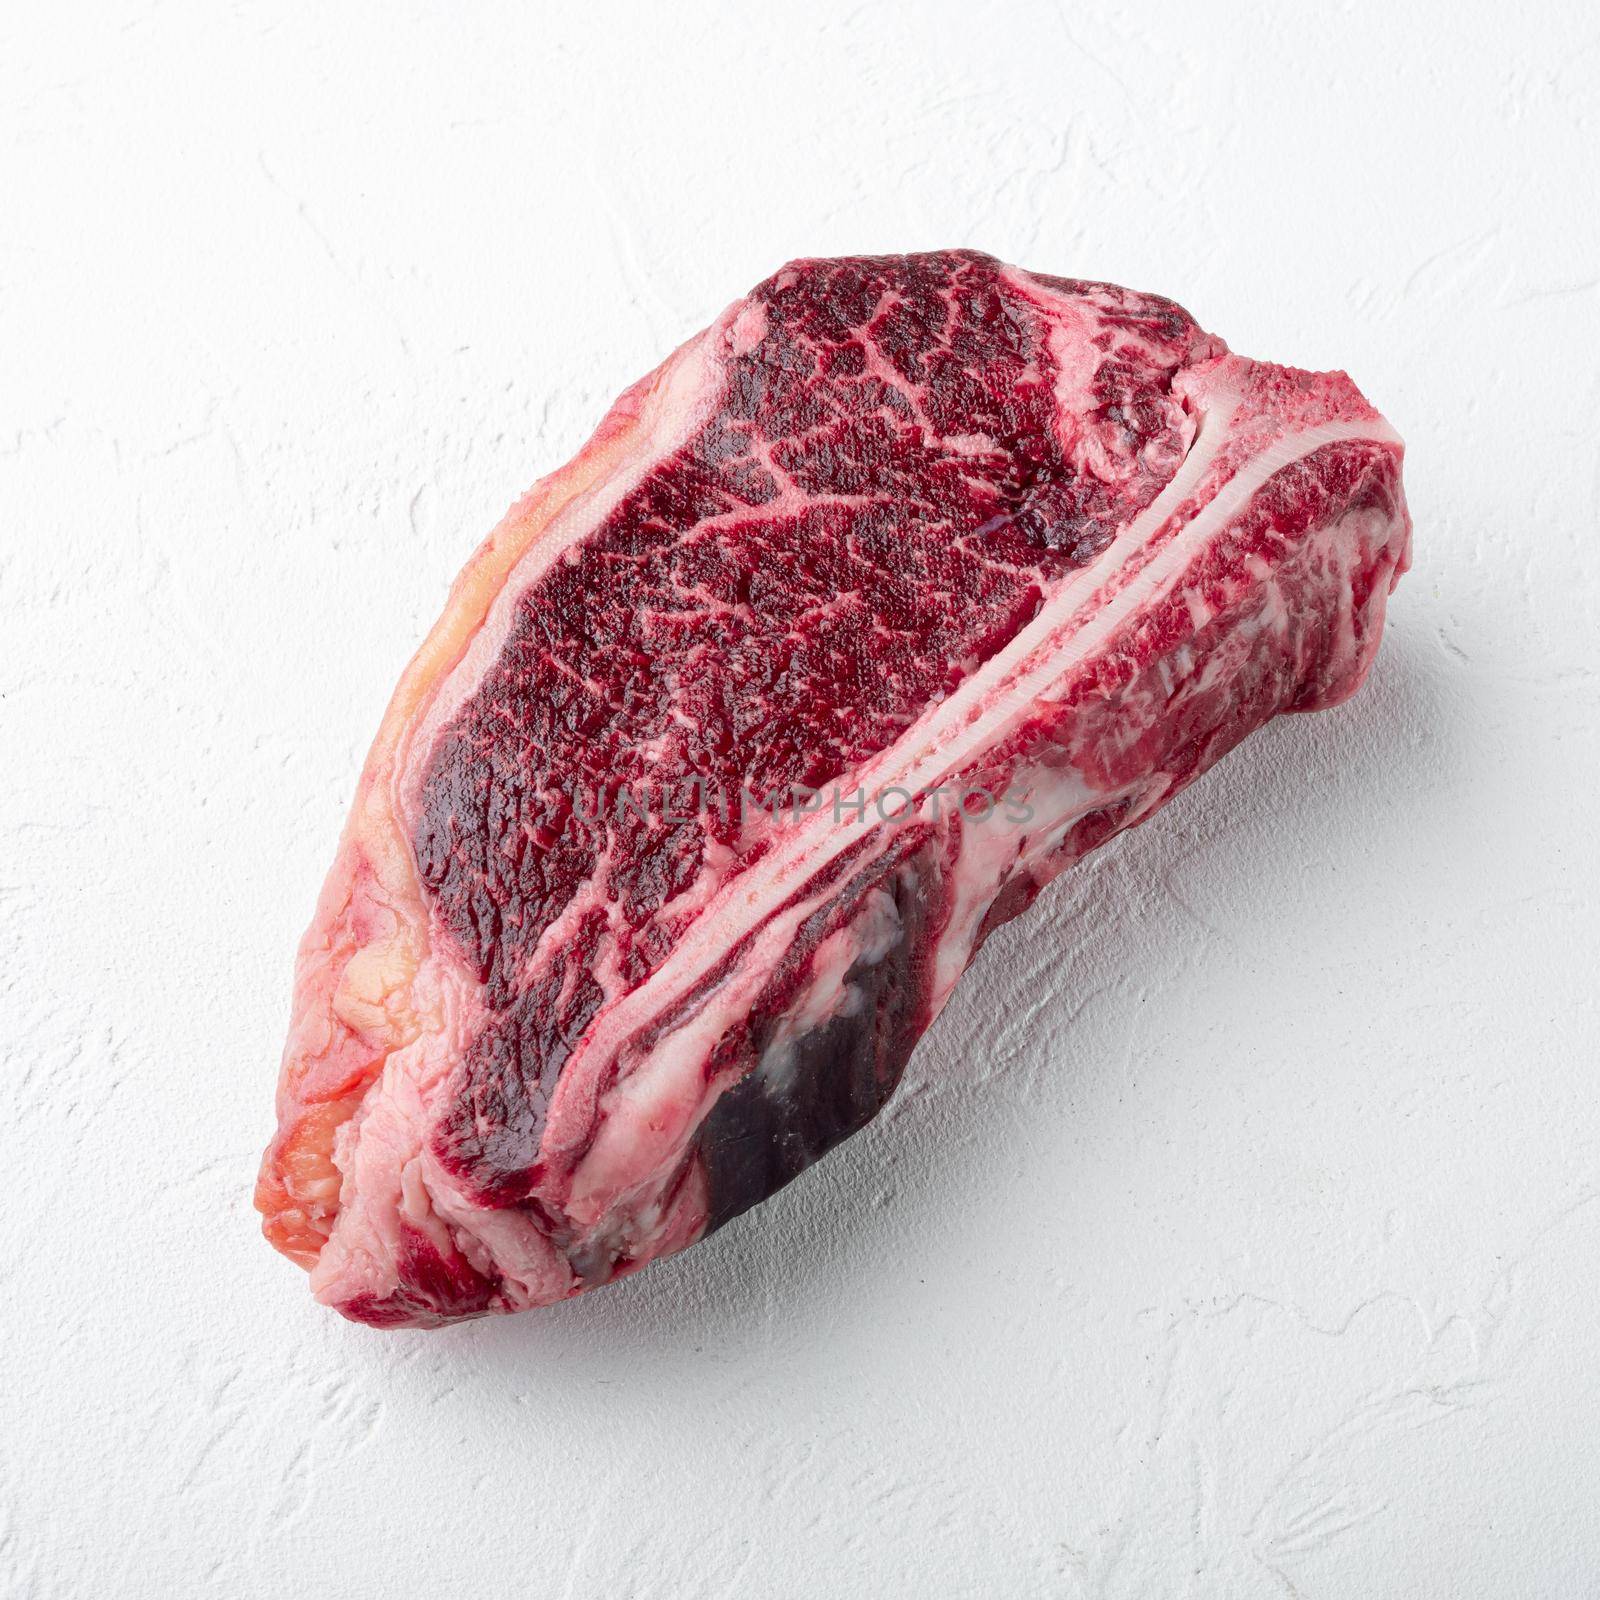 Dry aged club steak set, square format, on white stone surface